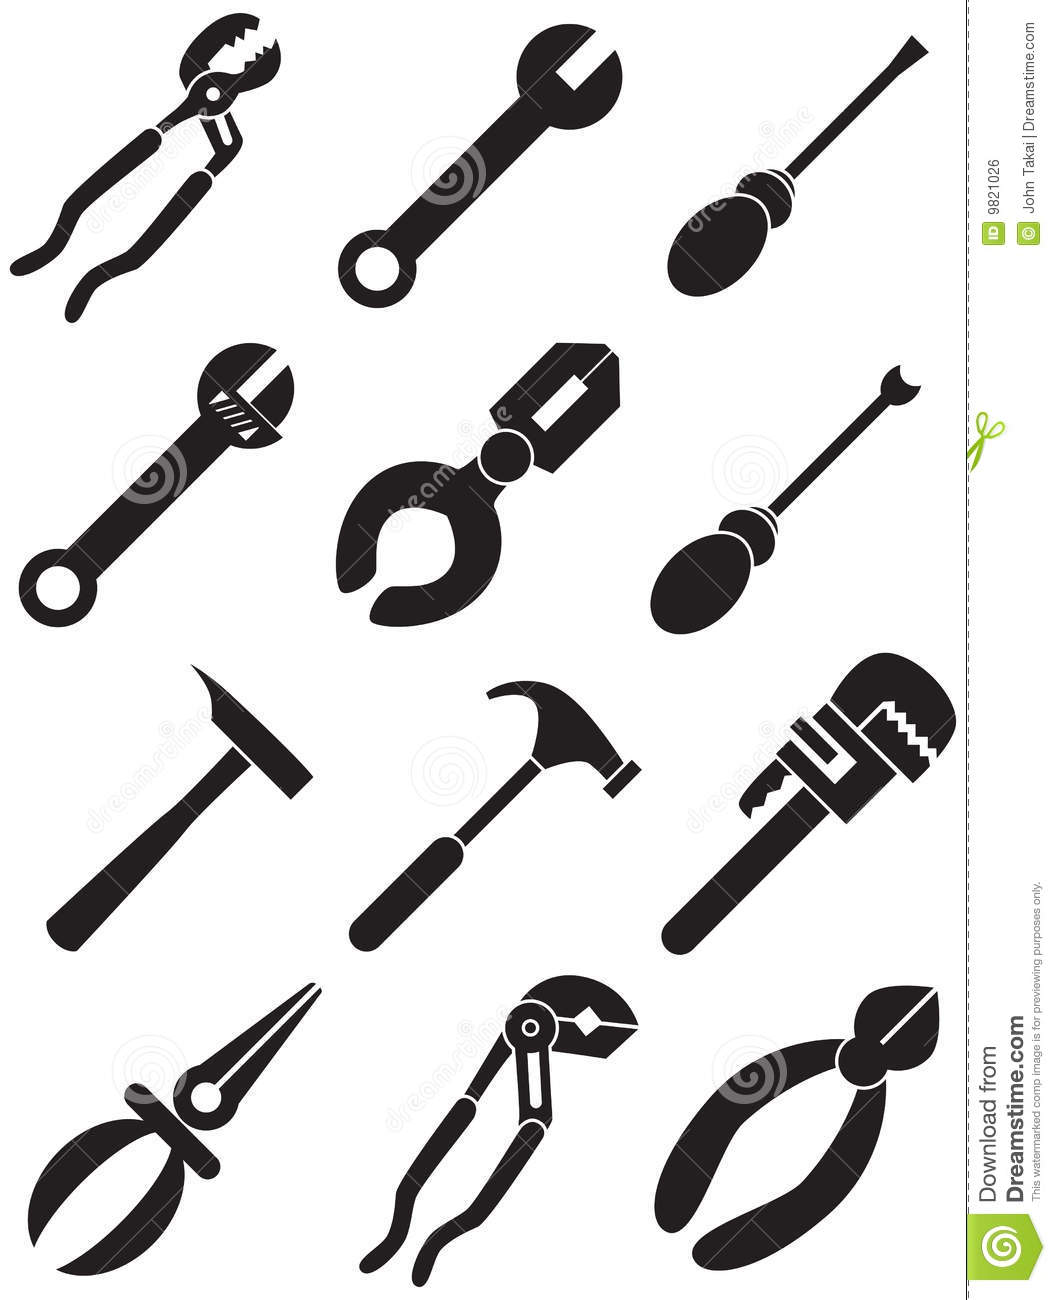 Tools clipart black and white 3 » Clipart Station.